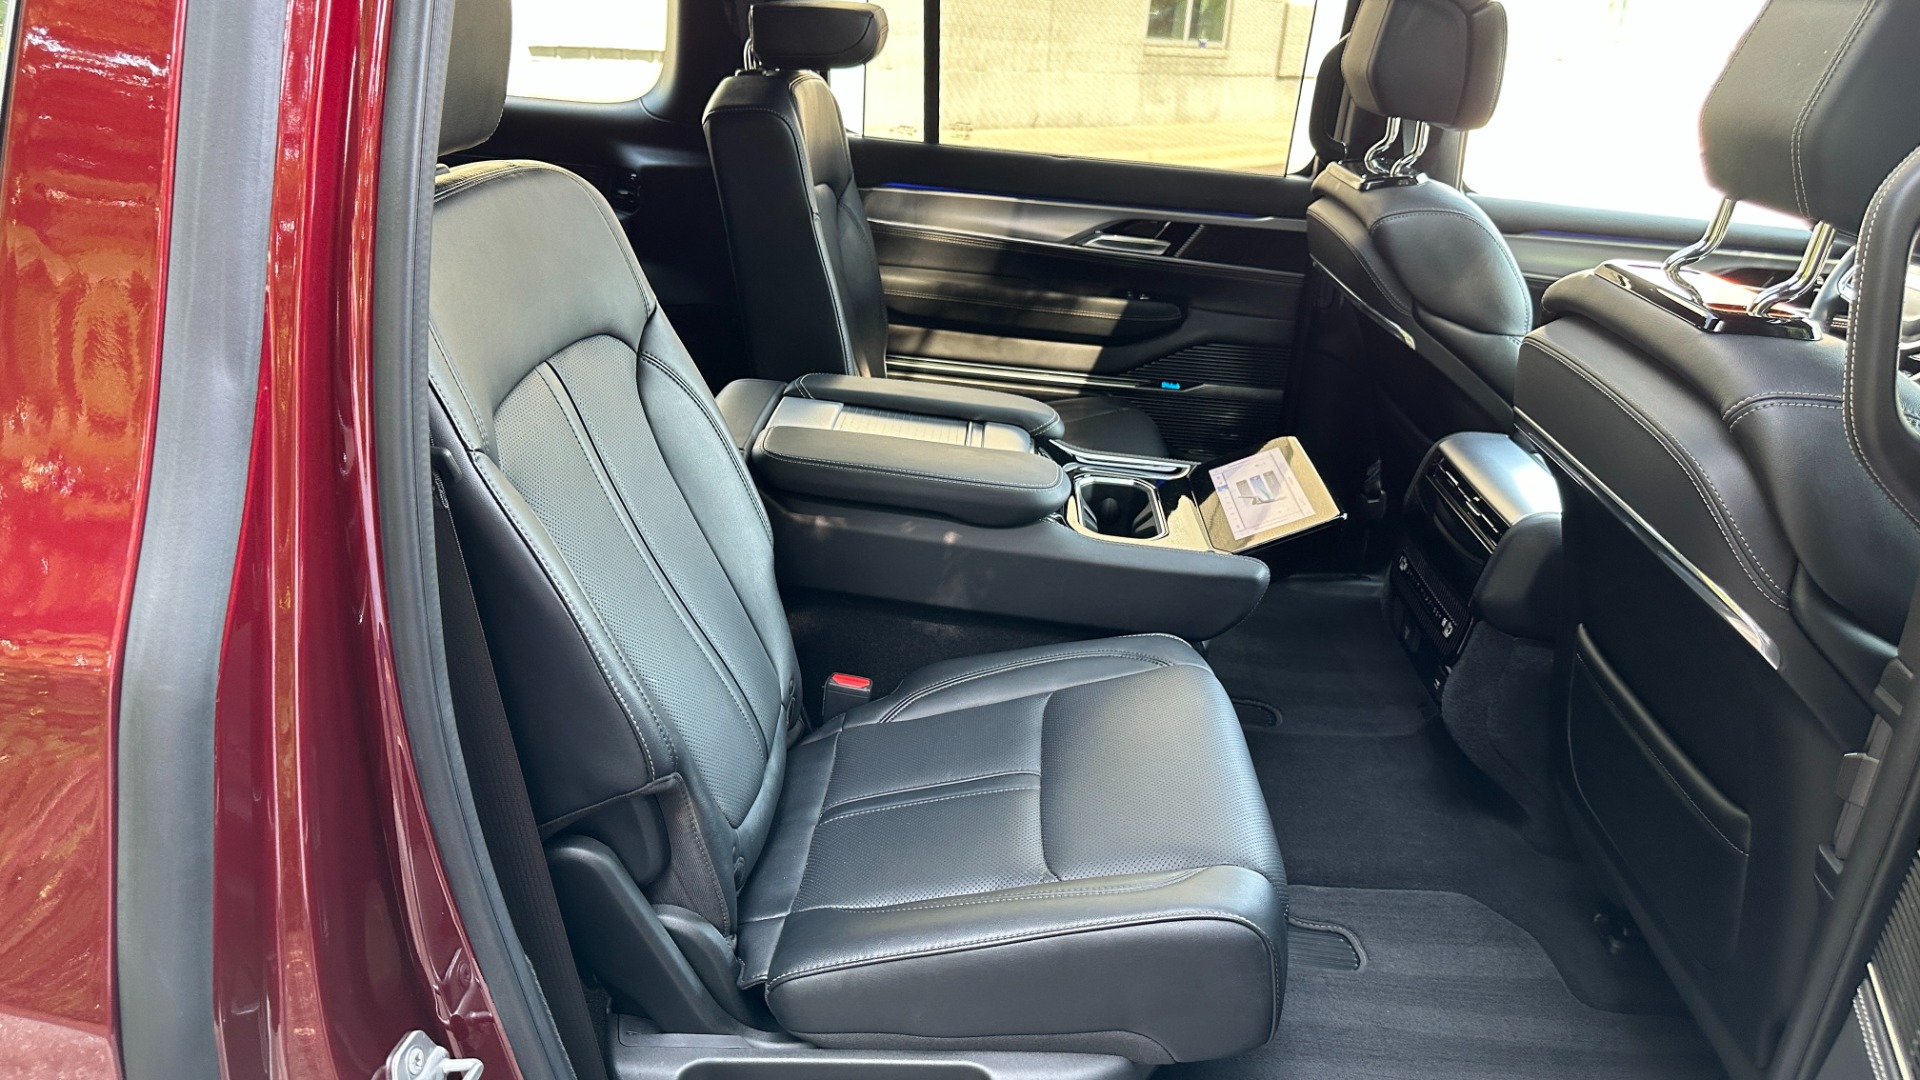 Used 2022 Jeep Grand Wagoneer Series I / PASSENGER FRONT DISPLAY / METAL ACCENTS / MCINTOSH SOUND for sale $68,500 at Formula Imports in Charlotte NC 28227 40